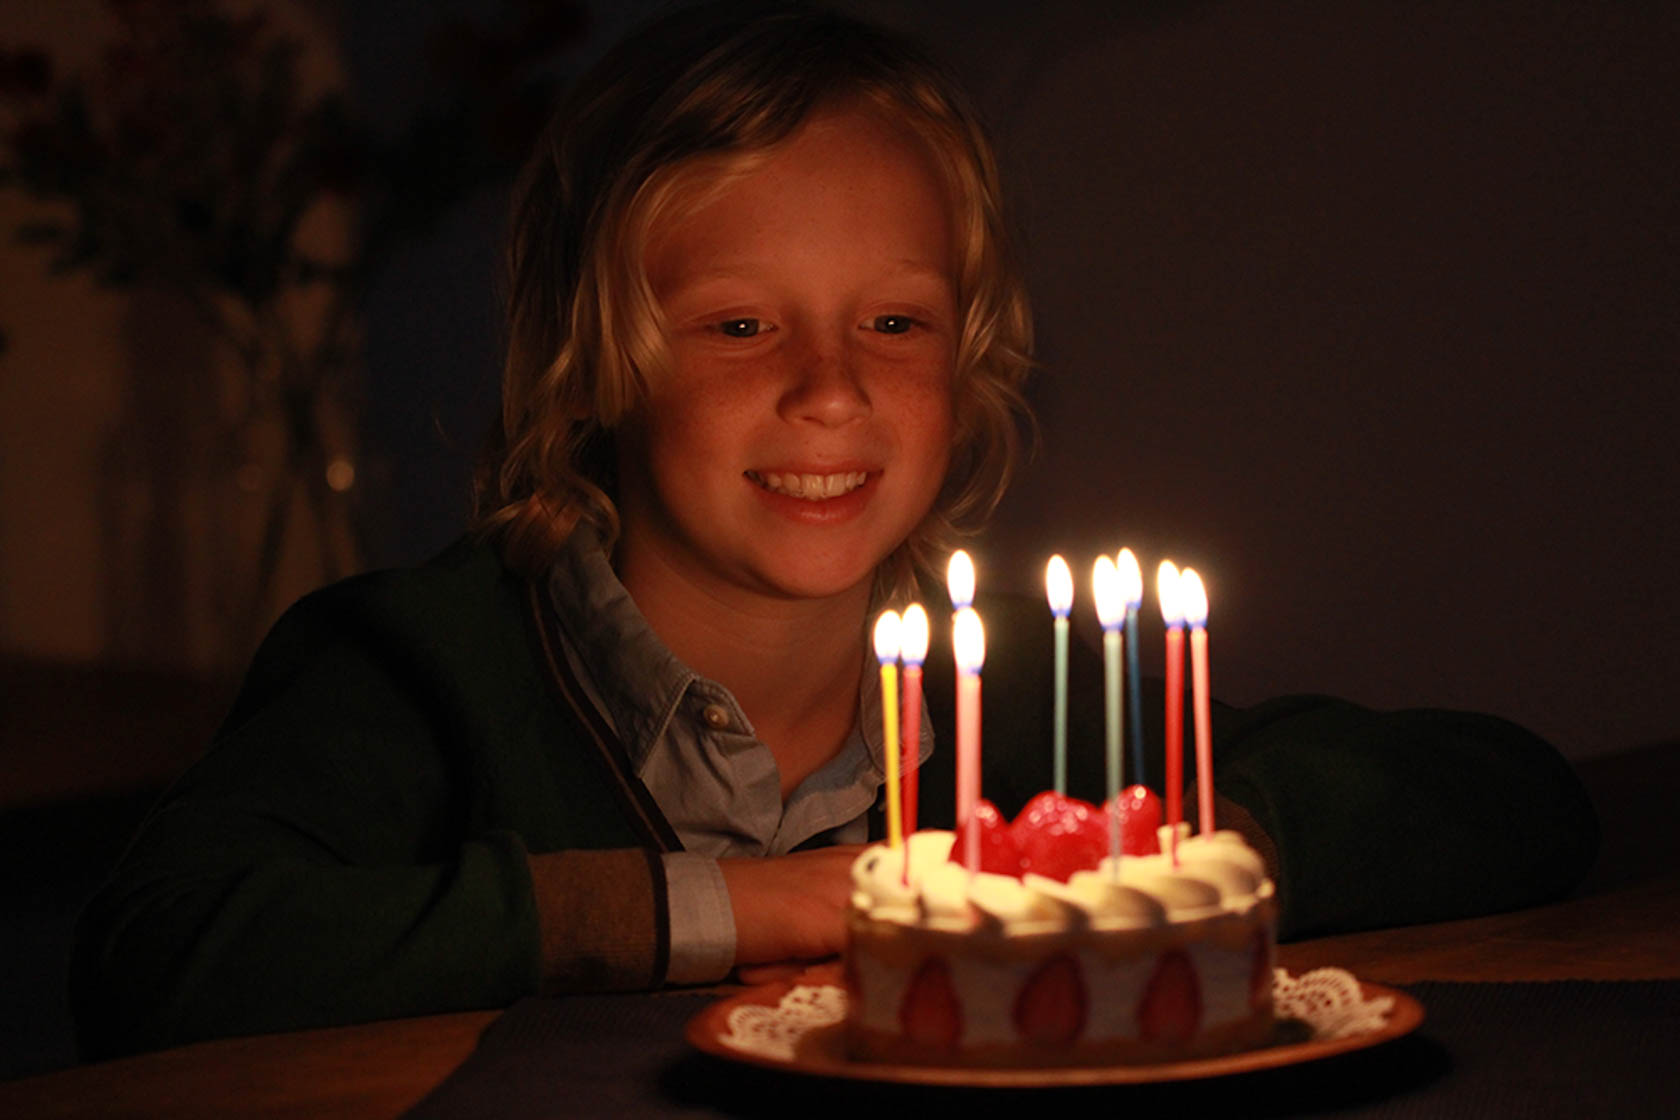 Young child sitting in front of a birthday cake with candles taken with Canon EOS 1300D DSLR camera